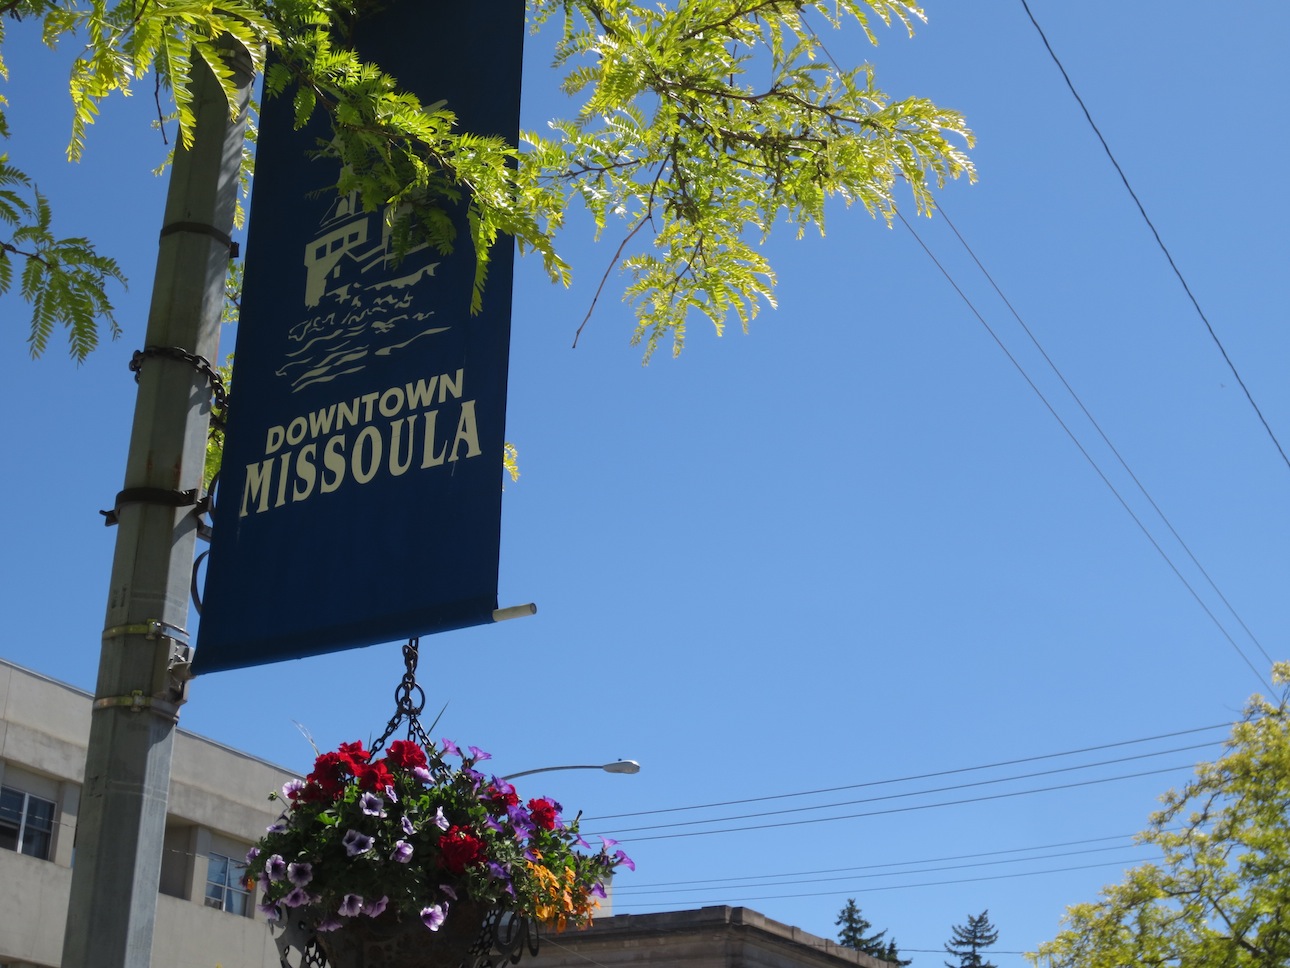 Sign for downtown Missoula.